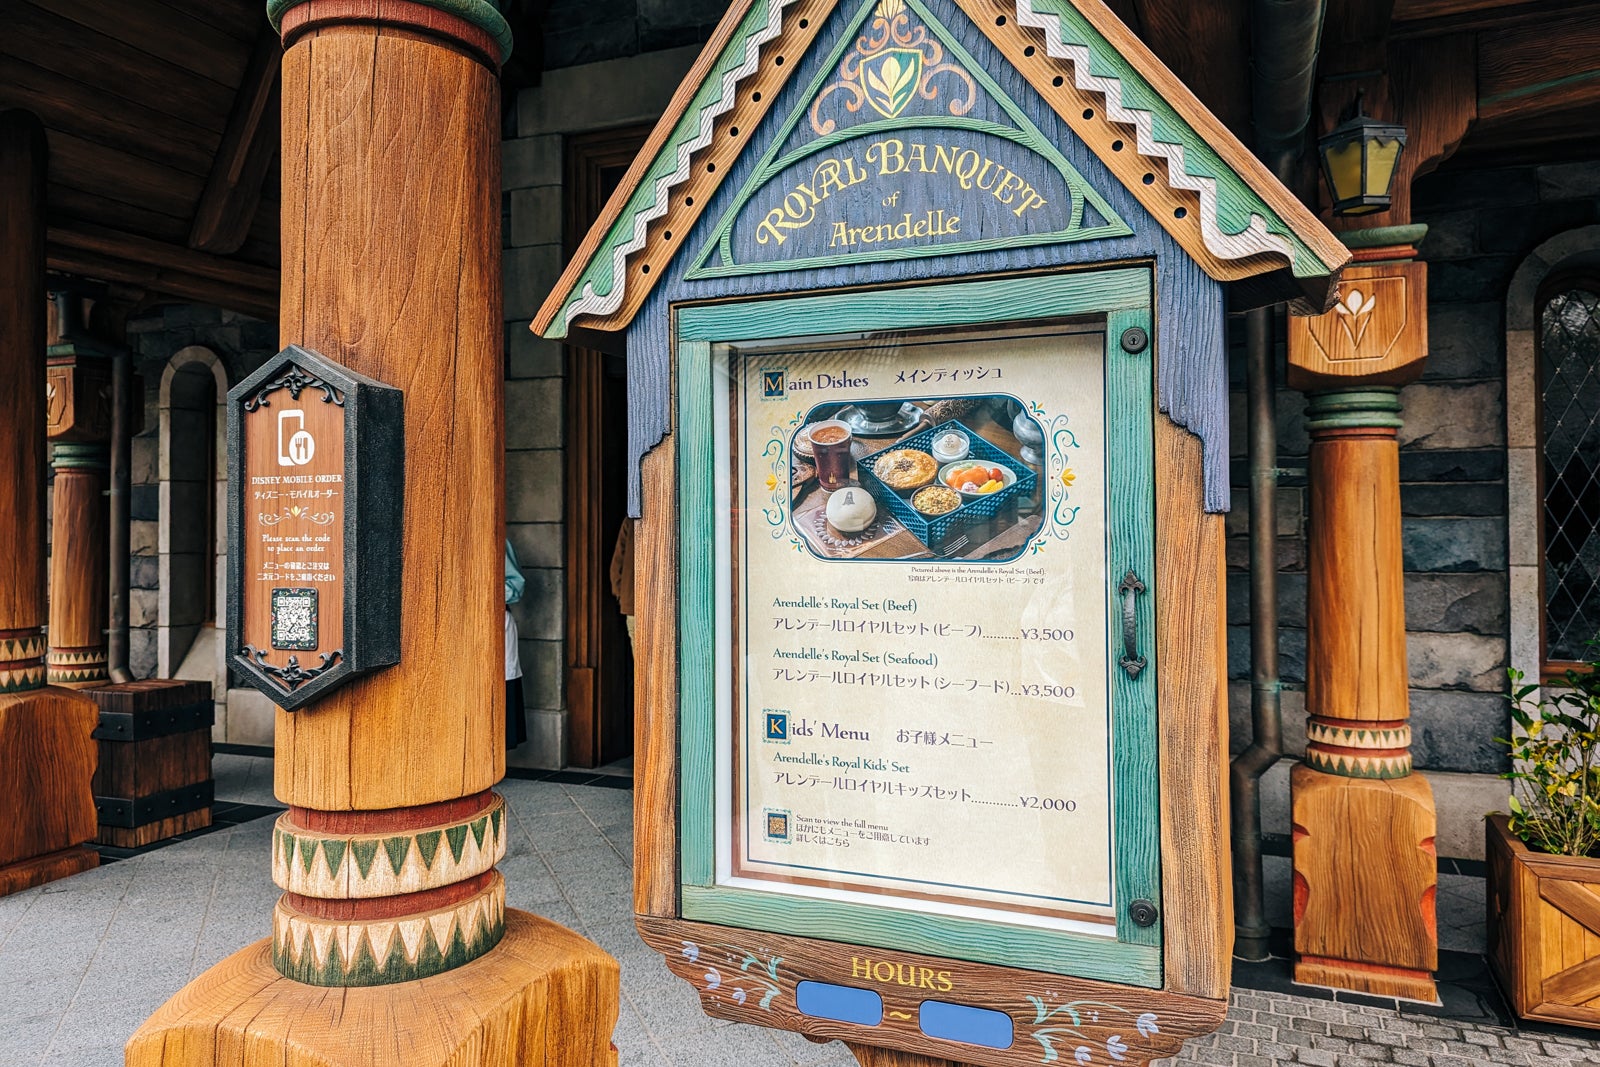 You can also purchase a children's version of the Royal Set and various drinks at the Royal Banquet of Arendelle.